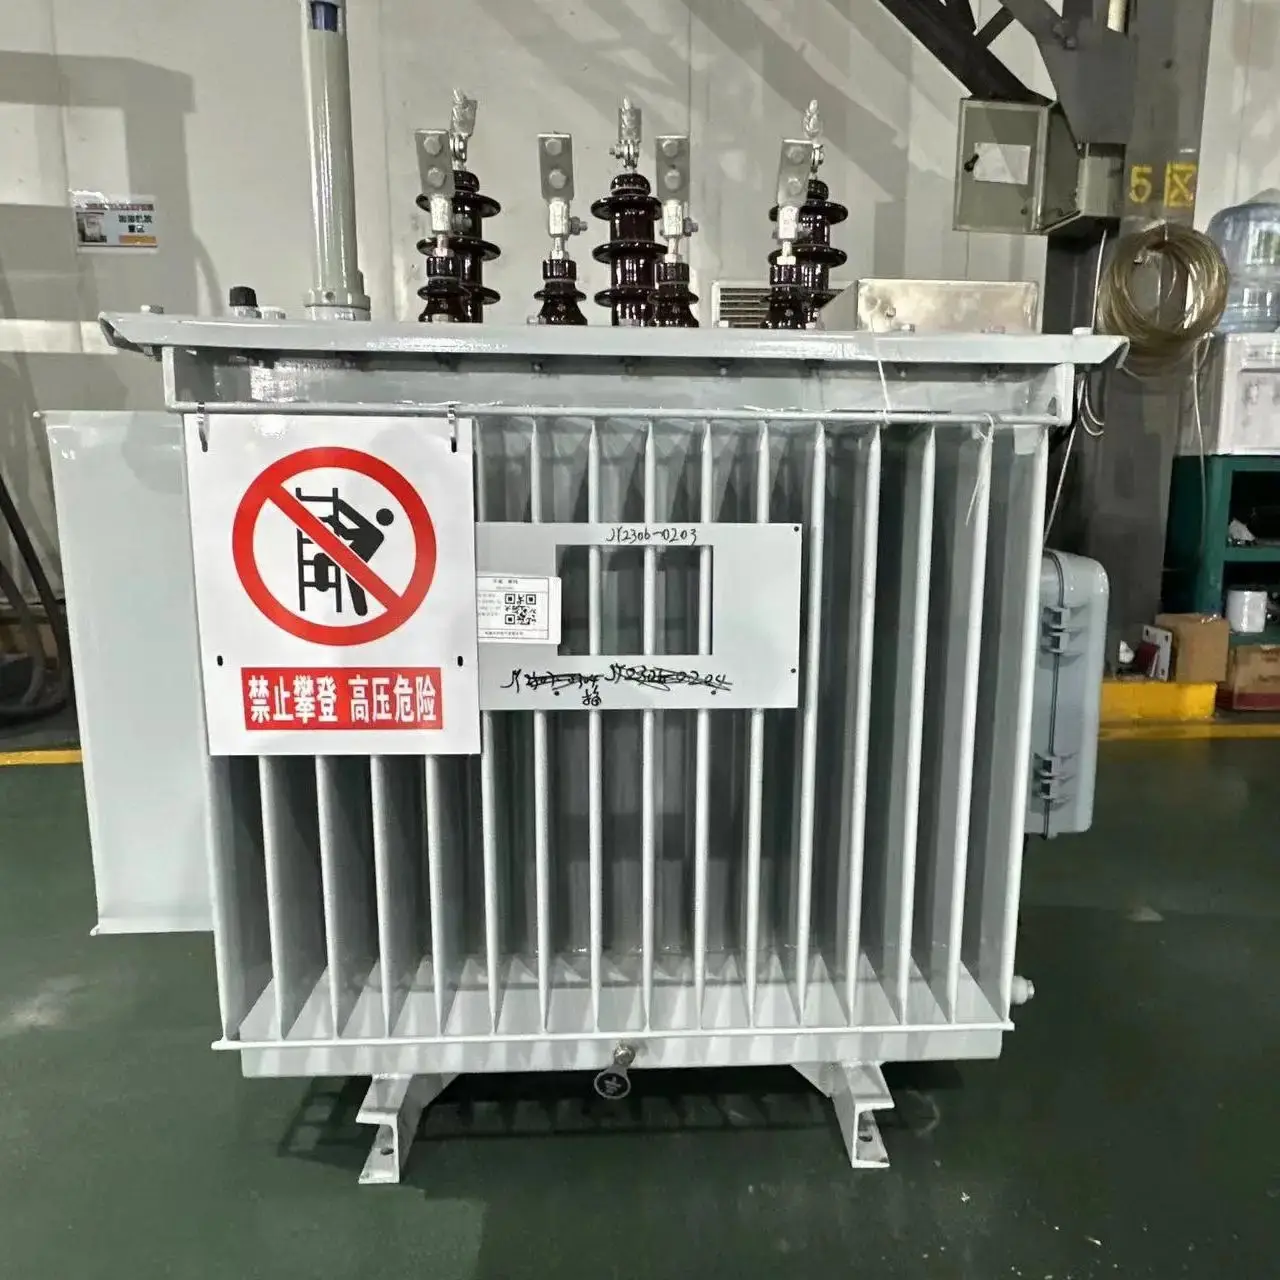 Hot Selling Transformer High Frequency Electrical Equipment 38.5VA 4000kVA High Quality Oil Immersed Transformers